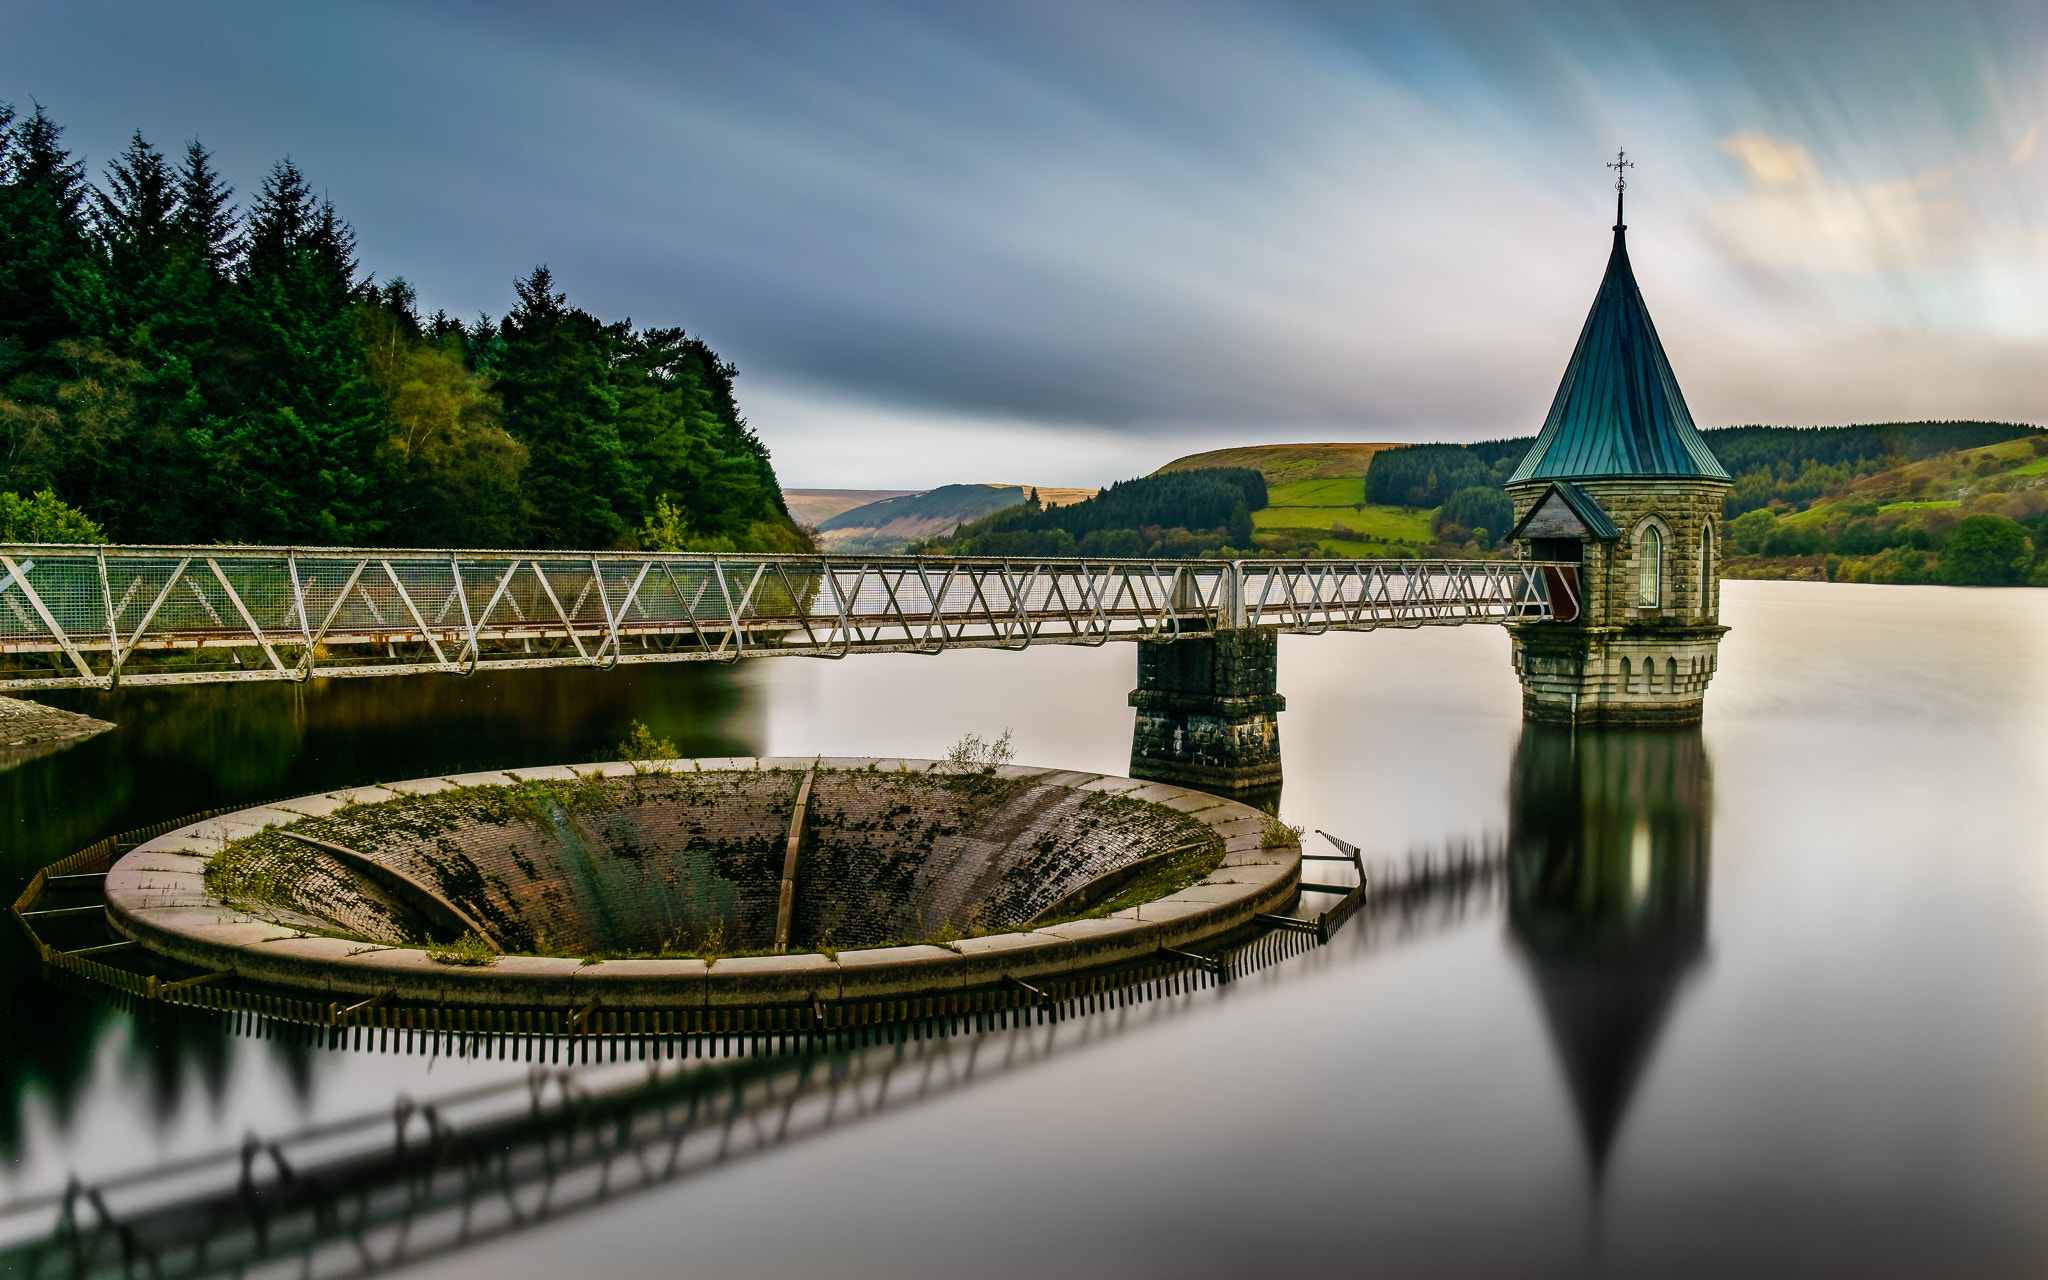 Sony a7 + Sony FE 28mm F2 sample photo. Pontsticill reservoir, brecon beacons national park photography